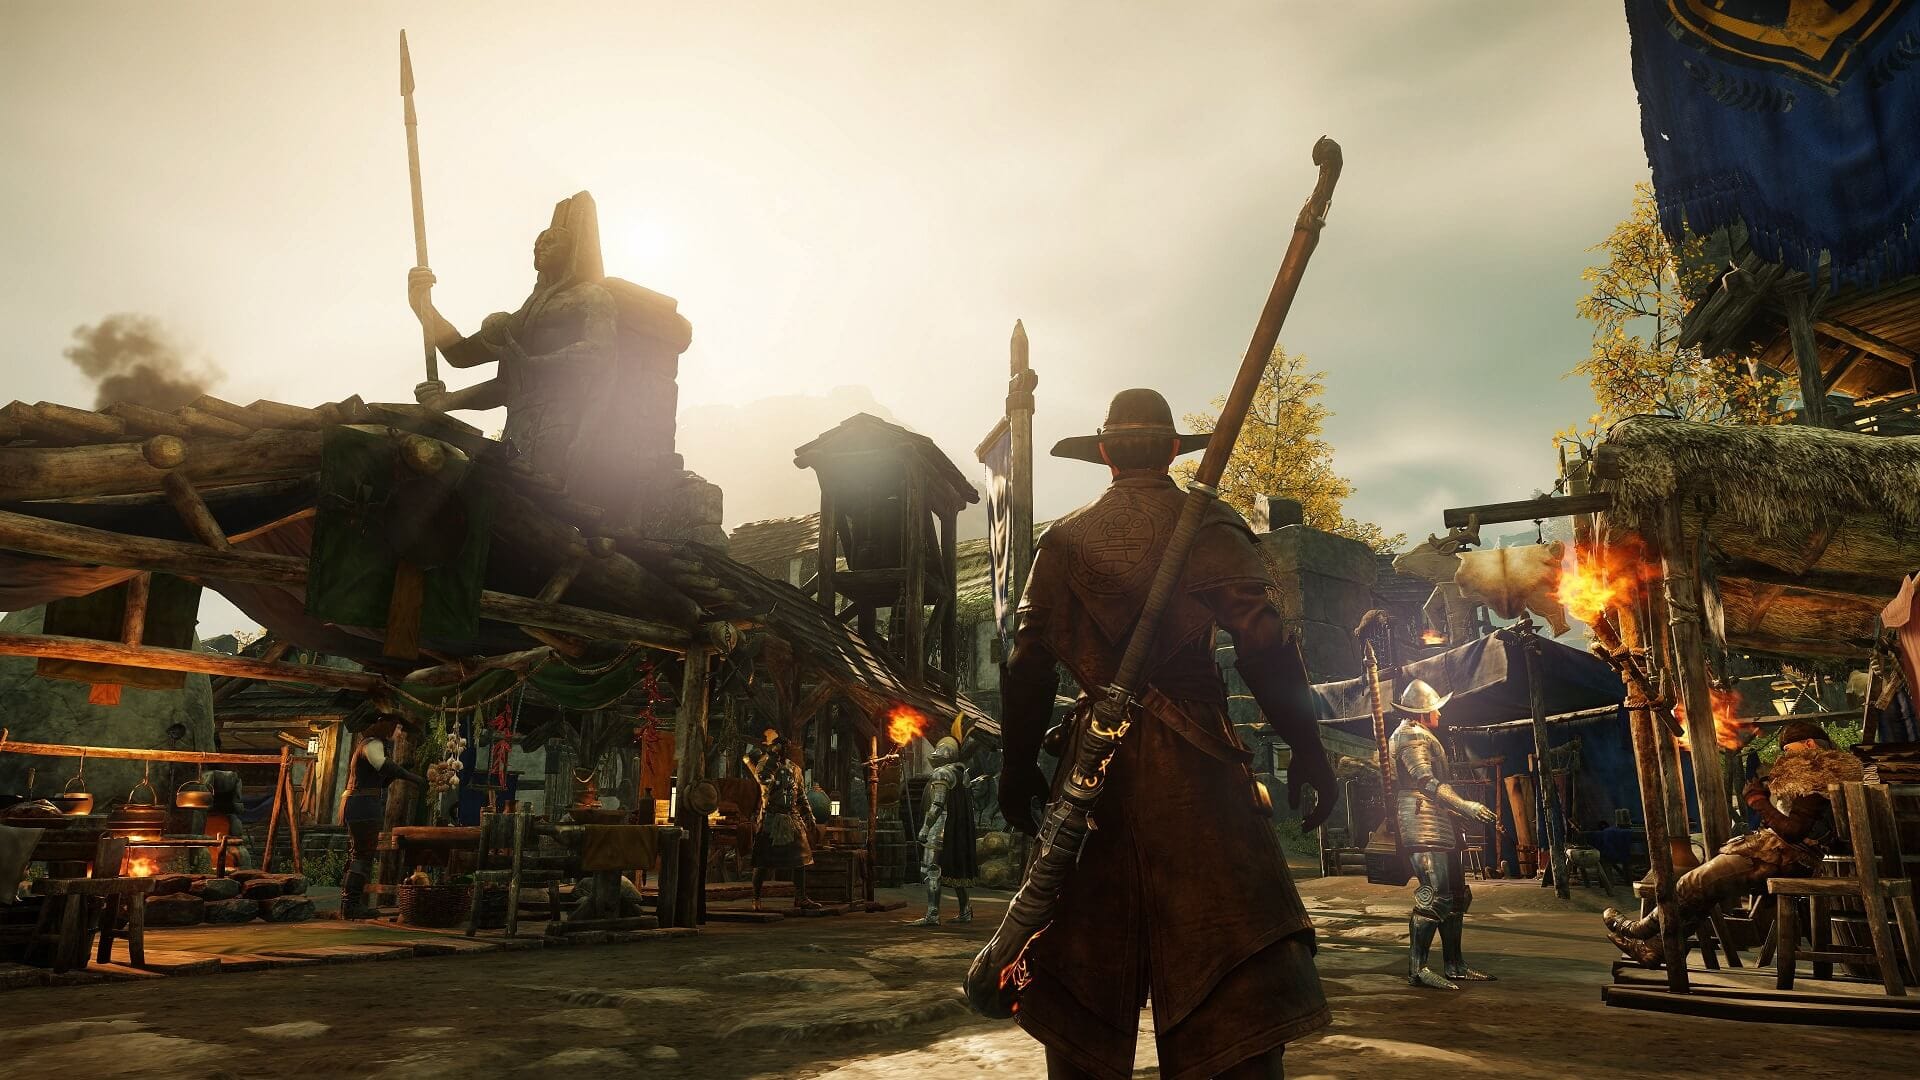 A player wandering the marketplace in New World